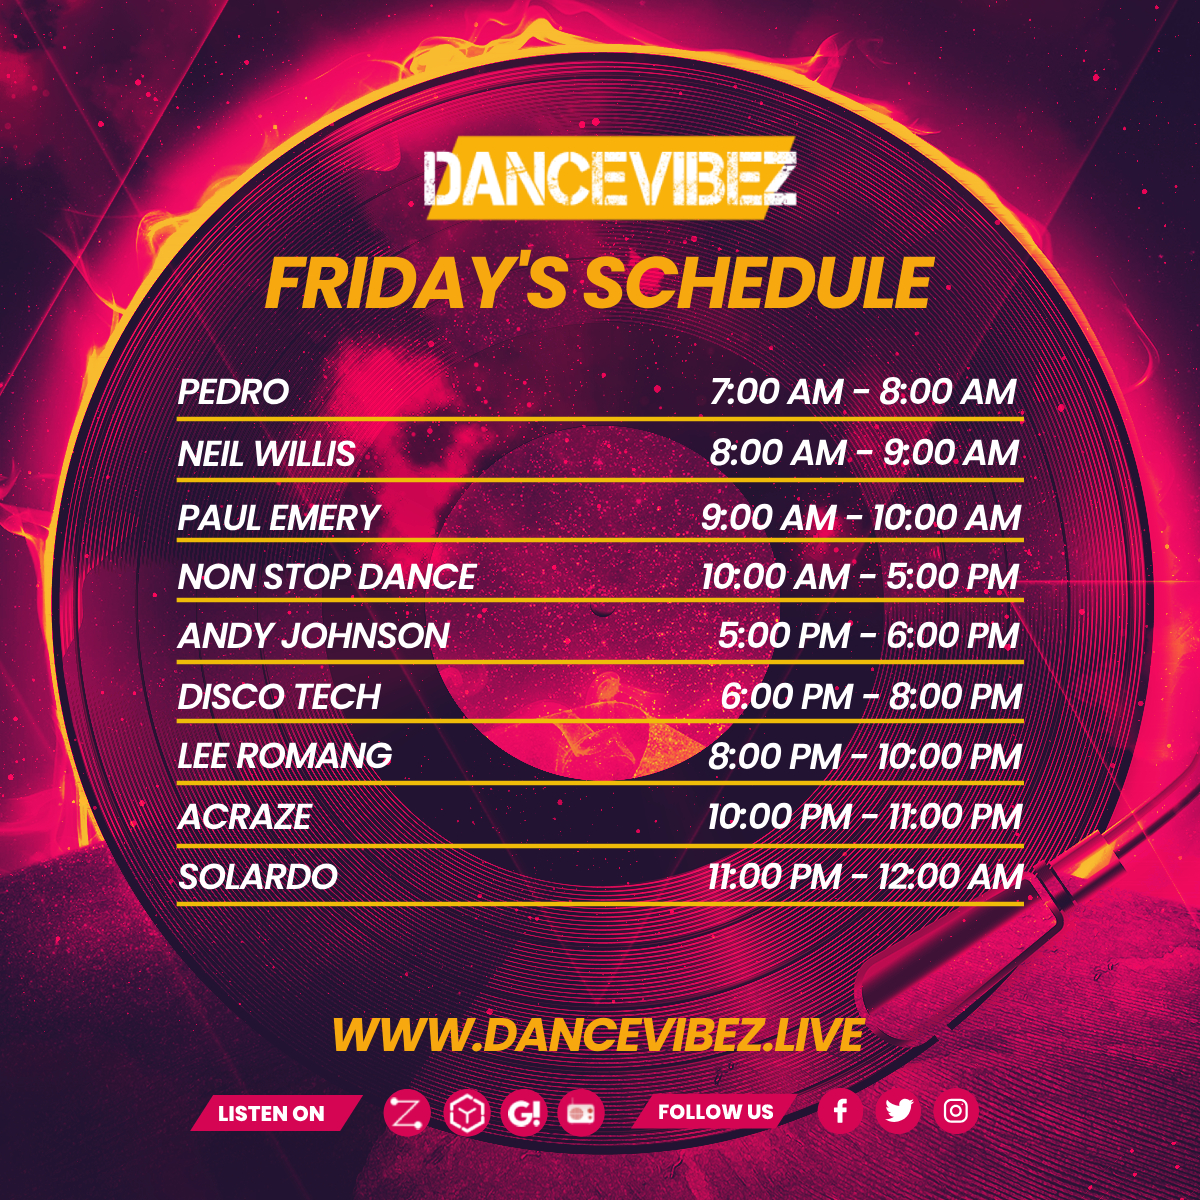 Banging 🎶comming your way! Take a 👀at this here time table. #wearedancevibez #housemusicallnightlong #housemusicdj #housemusicfamily #ilovehousemusic